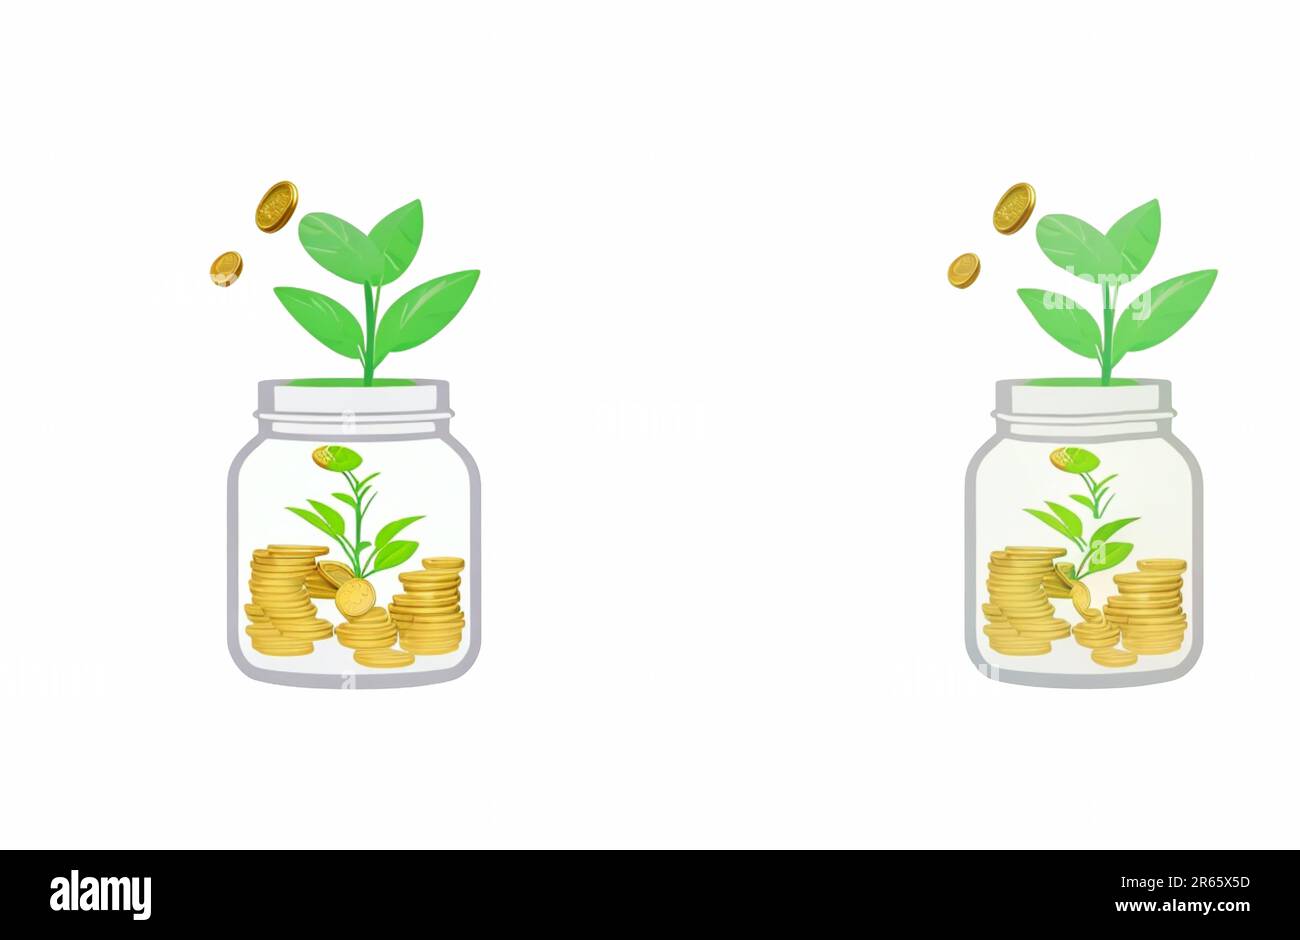 Saving money business concept with piggy bank, tree, coins, money, copy space on isolated white background Stock Photo